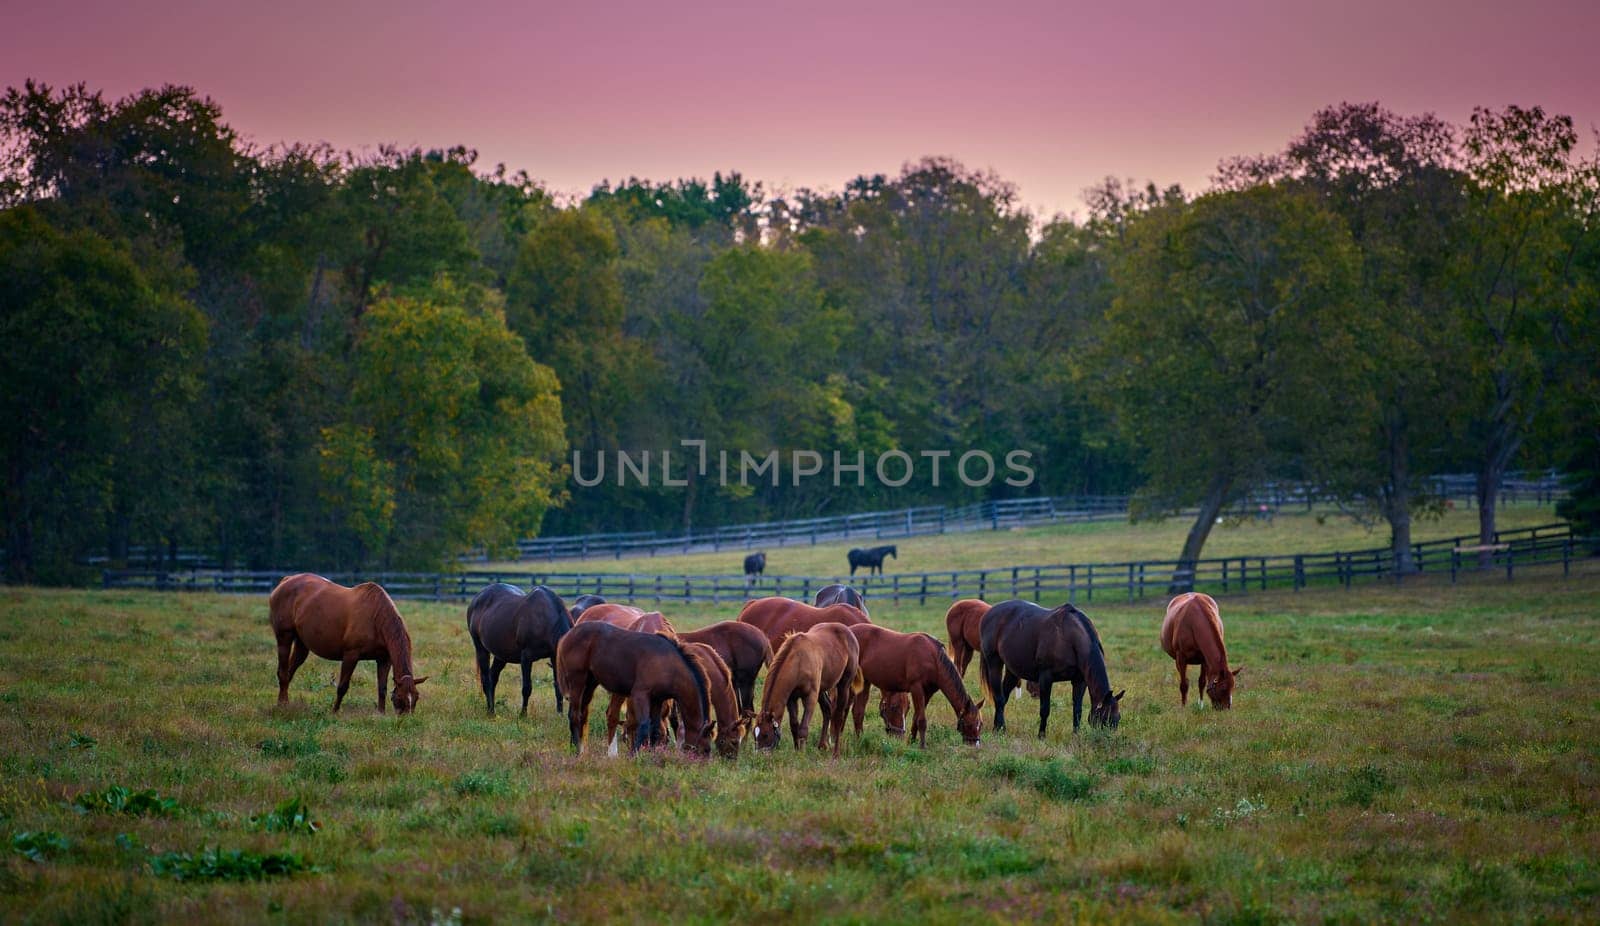 Group of horses grazing at evening in a open field.